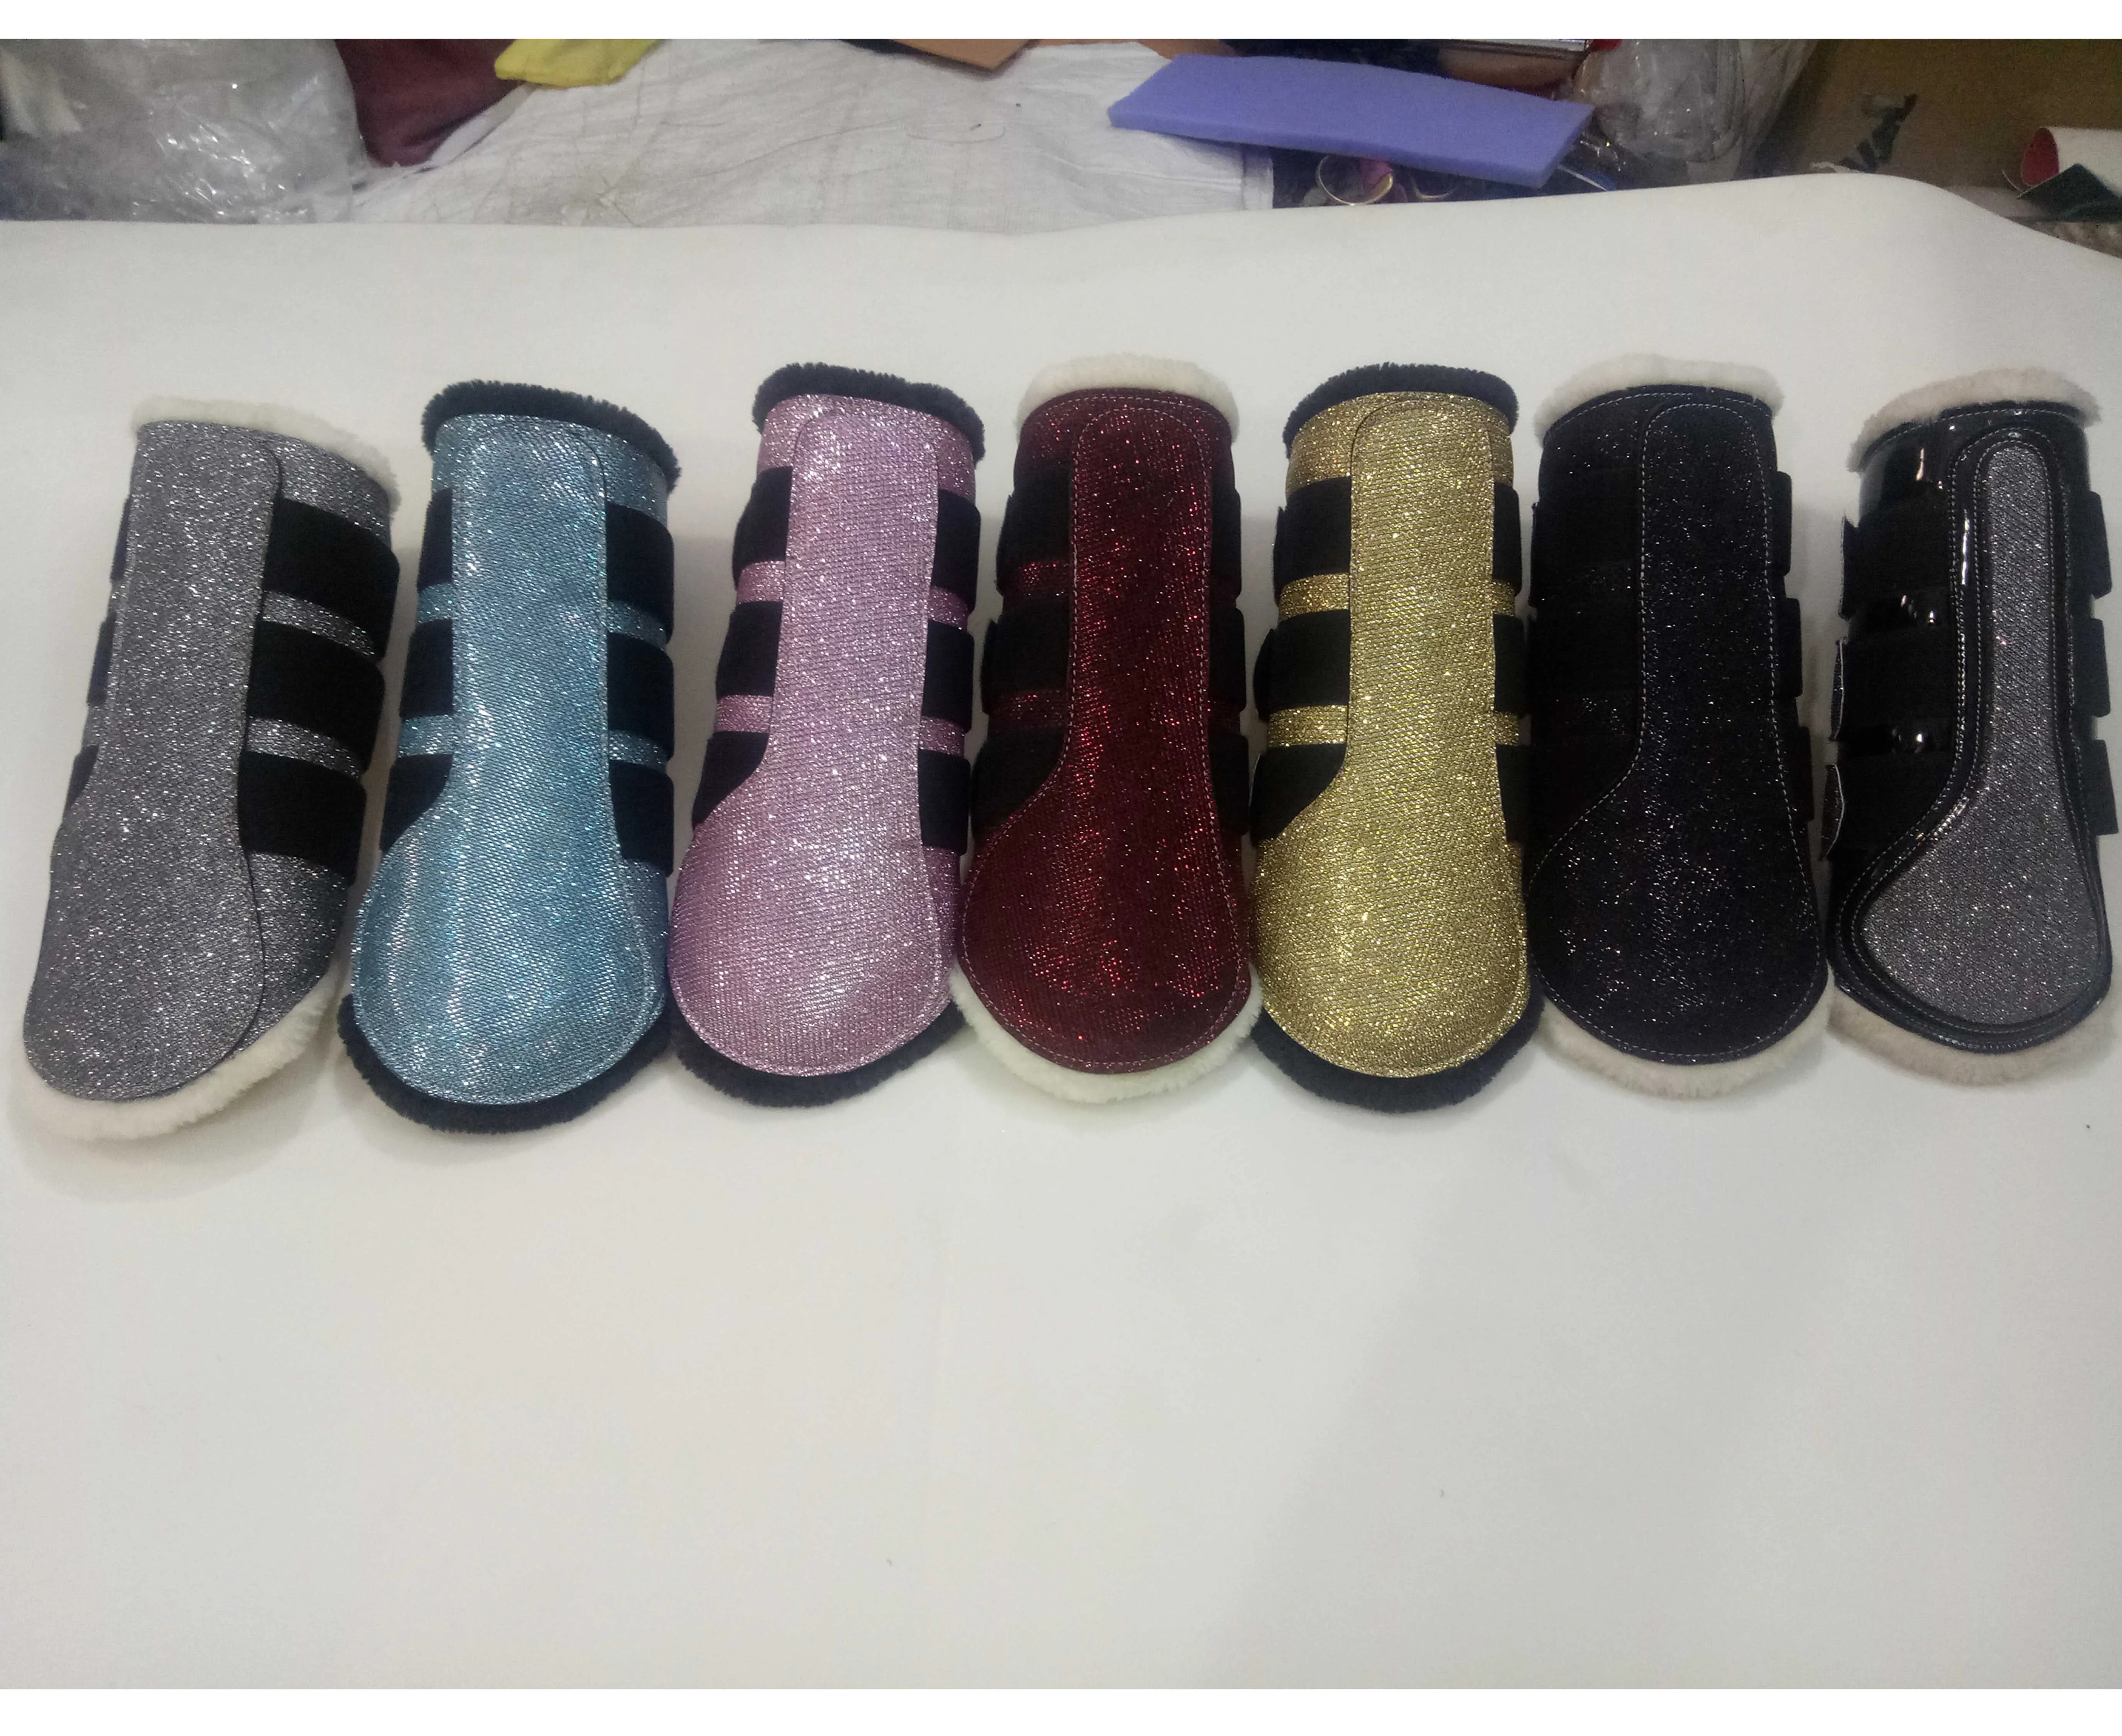 HORSE BOOTS GLITTER TENDON BOOTS PAIR WITH CUSTOMIZATION AVAILABLE MANY COLORS